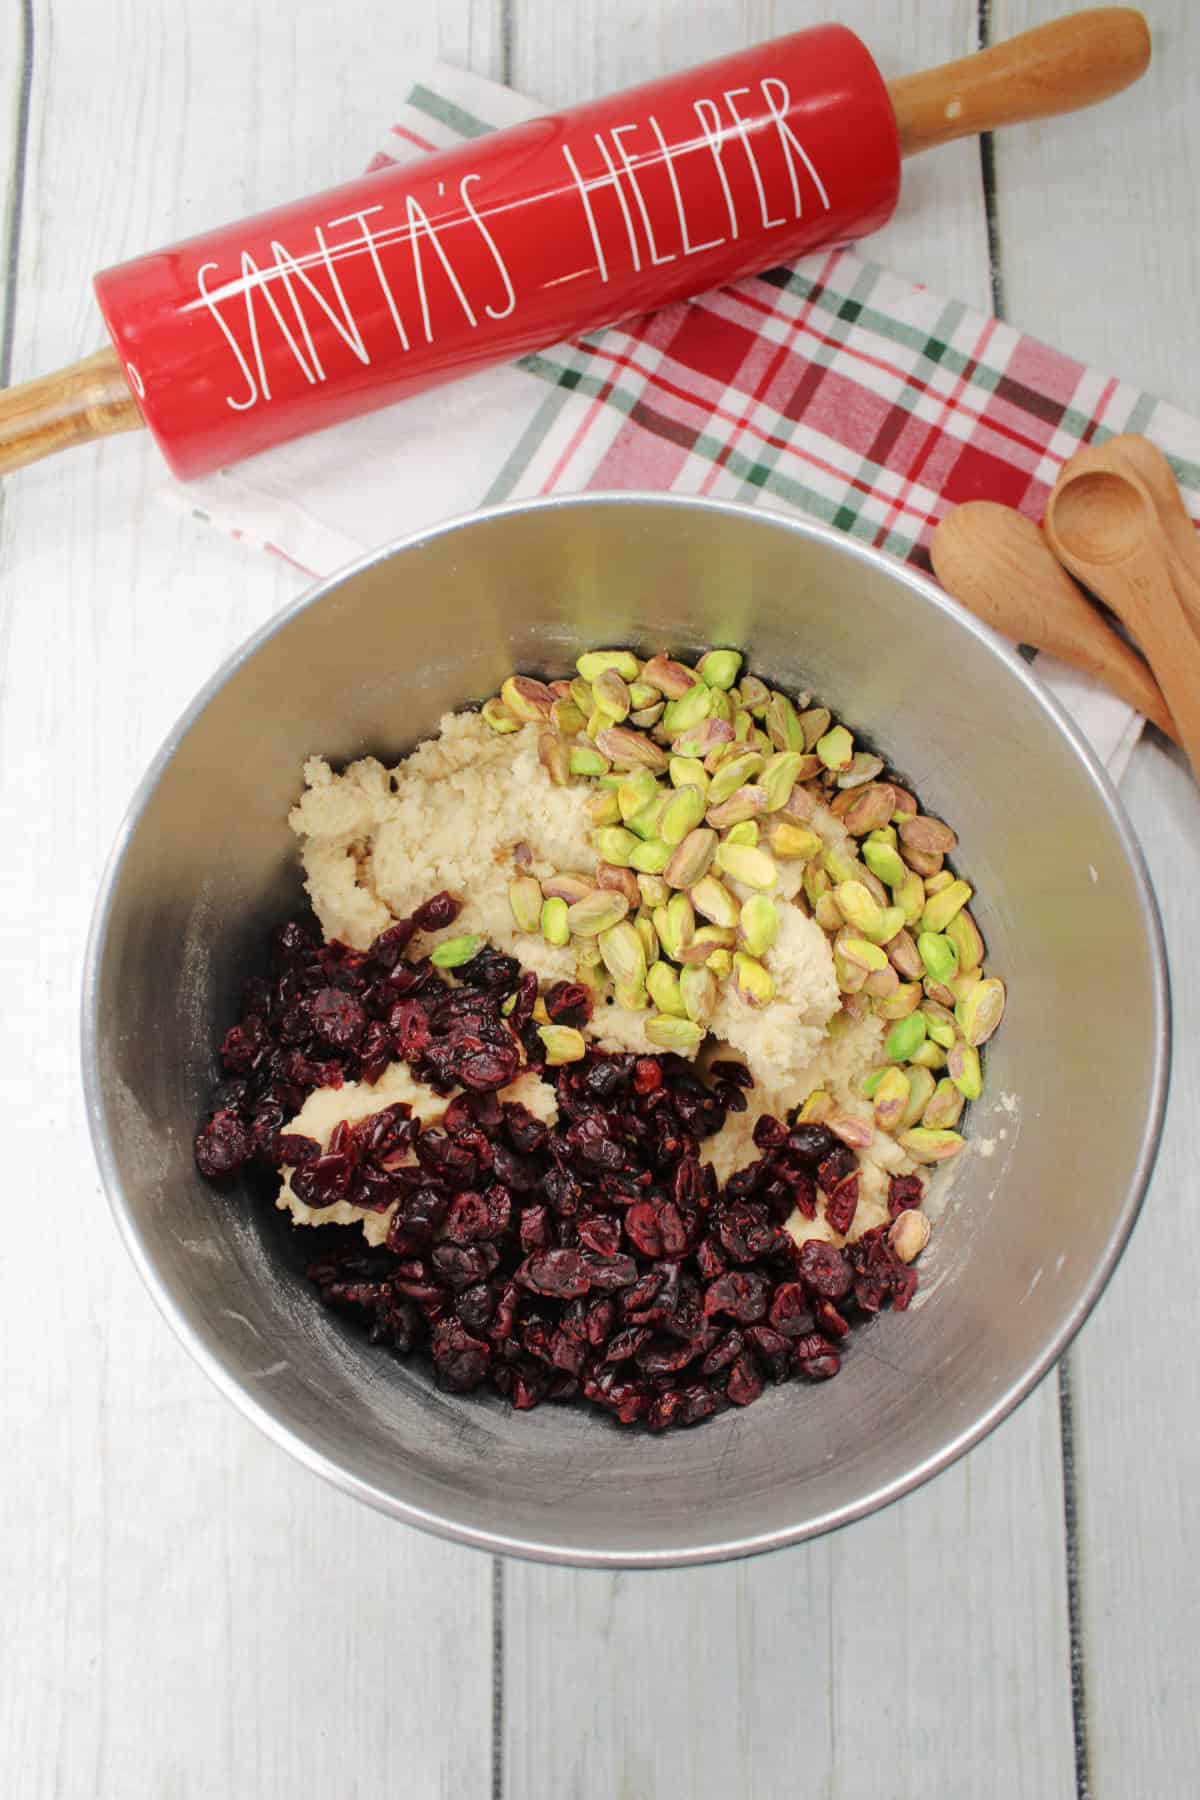 cranberries and pistachios added to cookie dough.